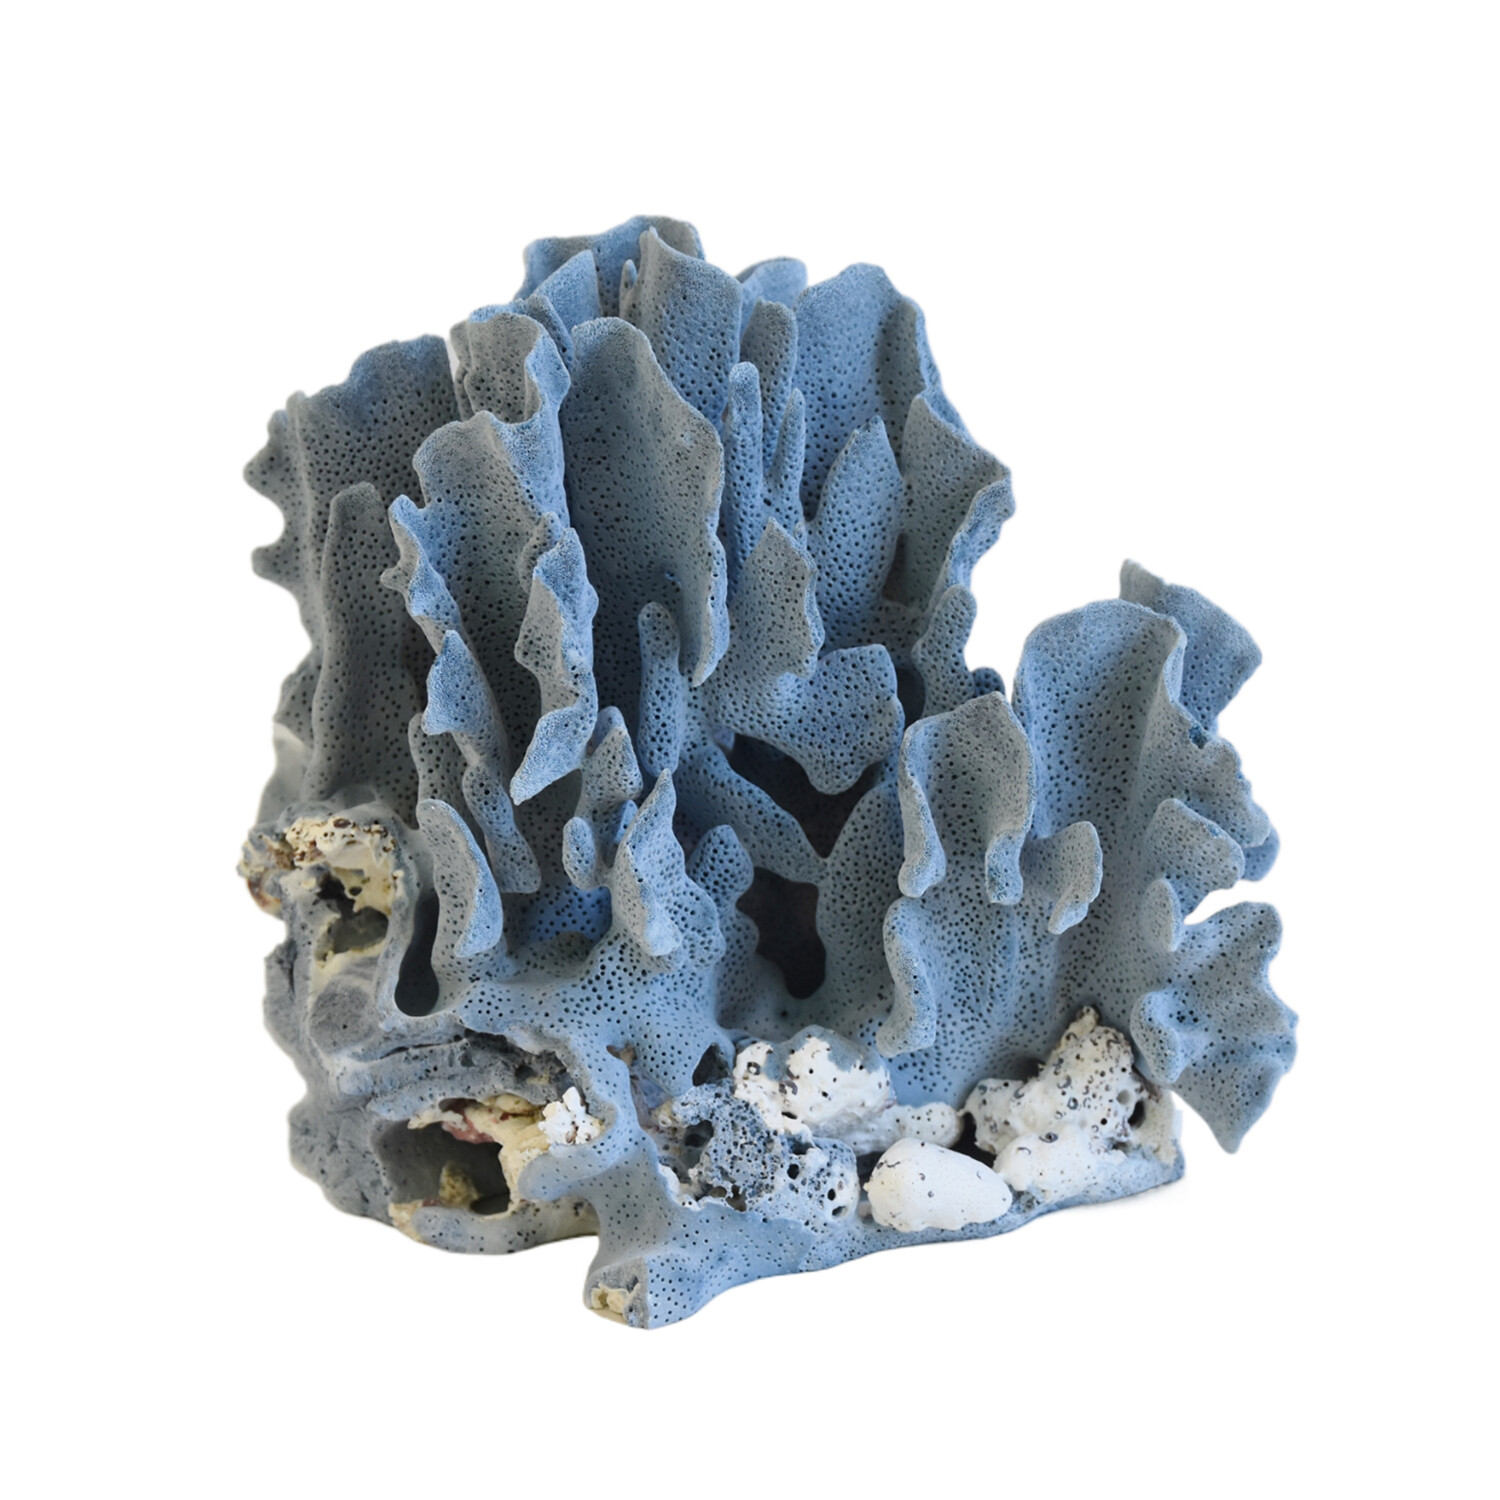 Coastal Nautical Blue Coral Specimen - Prized Pig by Mike Seratt - Touch of  Modern